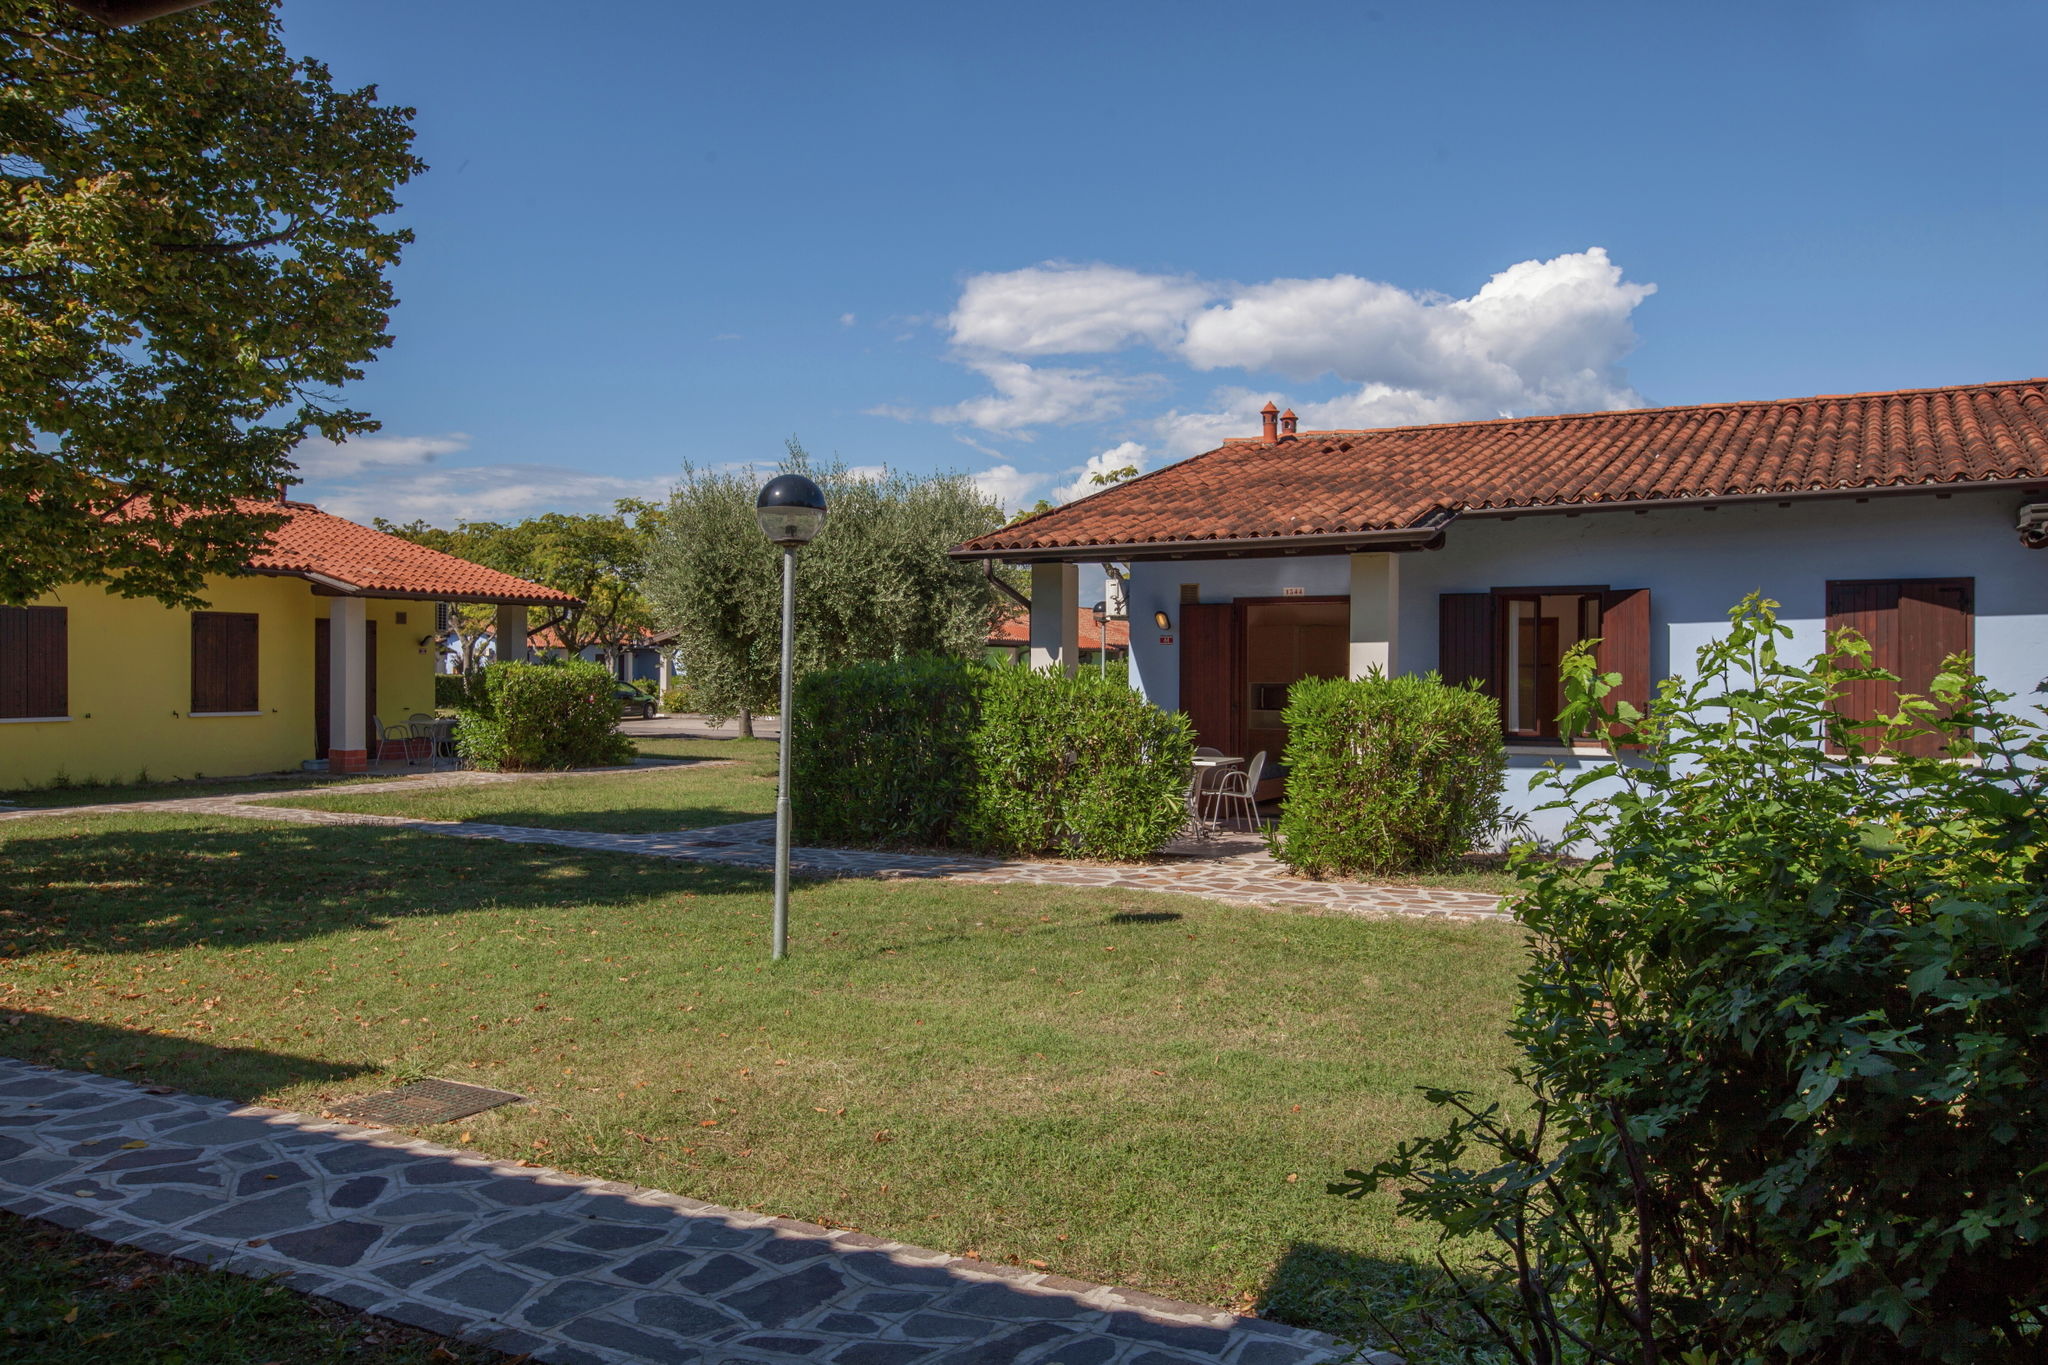 Semi-detached bungalow with AC just 3, 5 km. from Sirmione